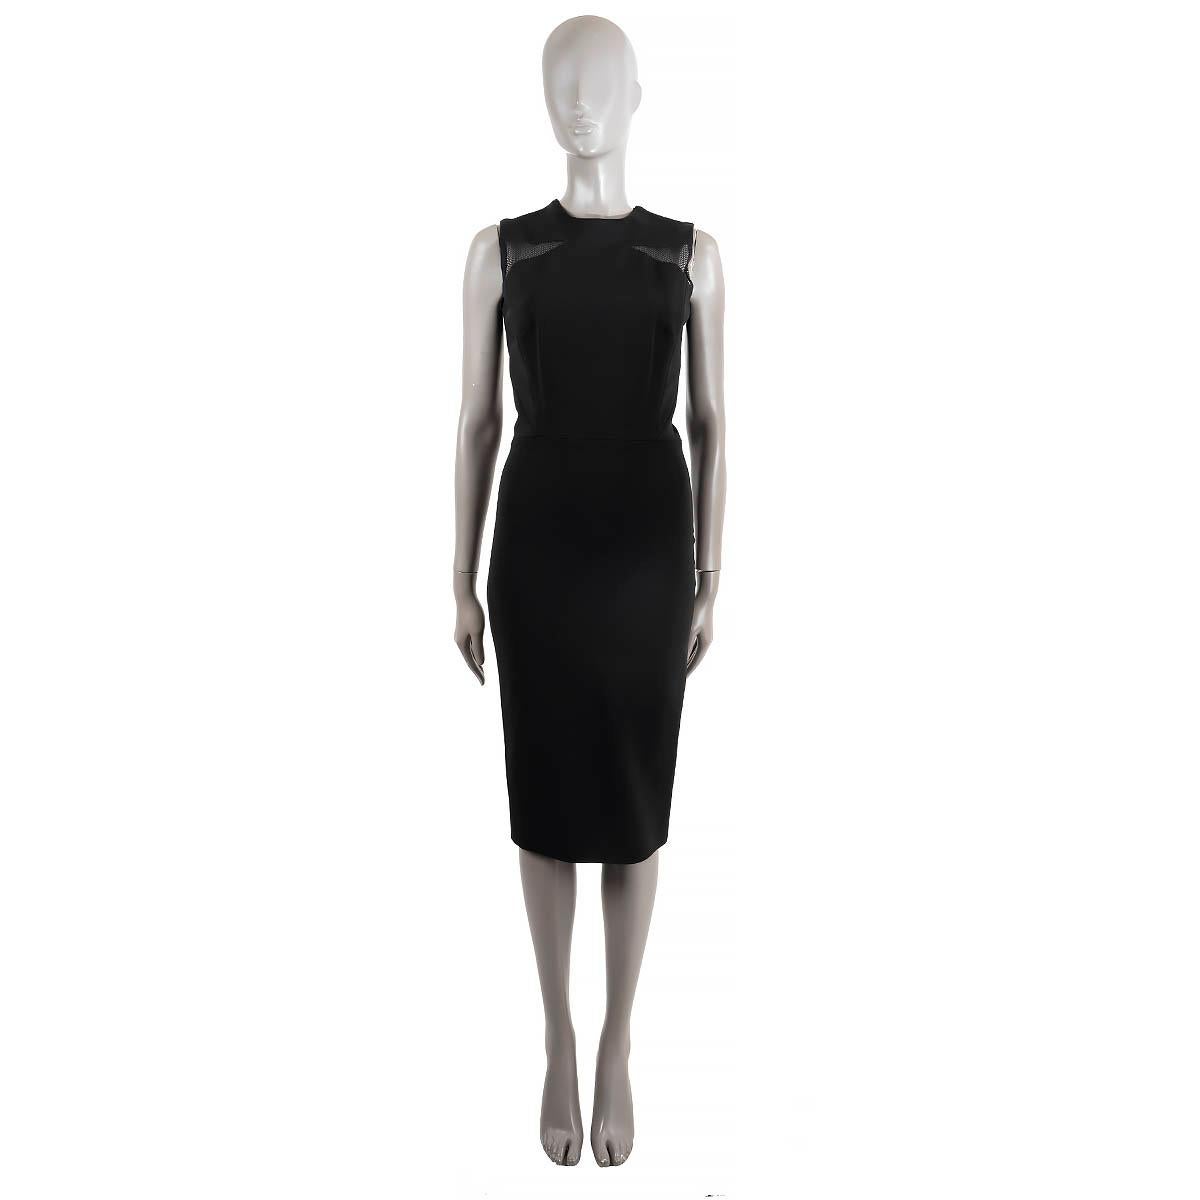 100% authentic Victoria Beckham stretchy sheath midi dress in black viscose (86%), polyester (10%) and elastane (4%). Opens with a double zipper on the back and features mesh inserts on the chest. Lined in black silk (100%).  Has been worn and is in